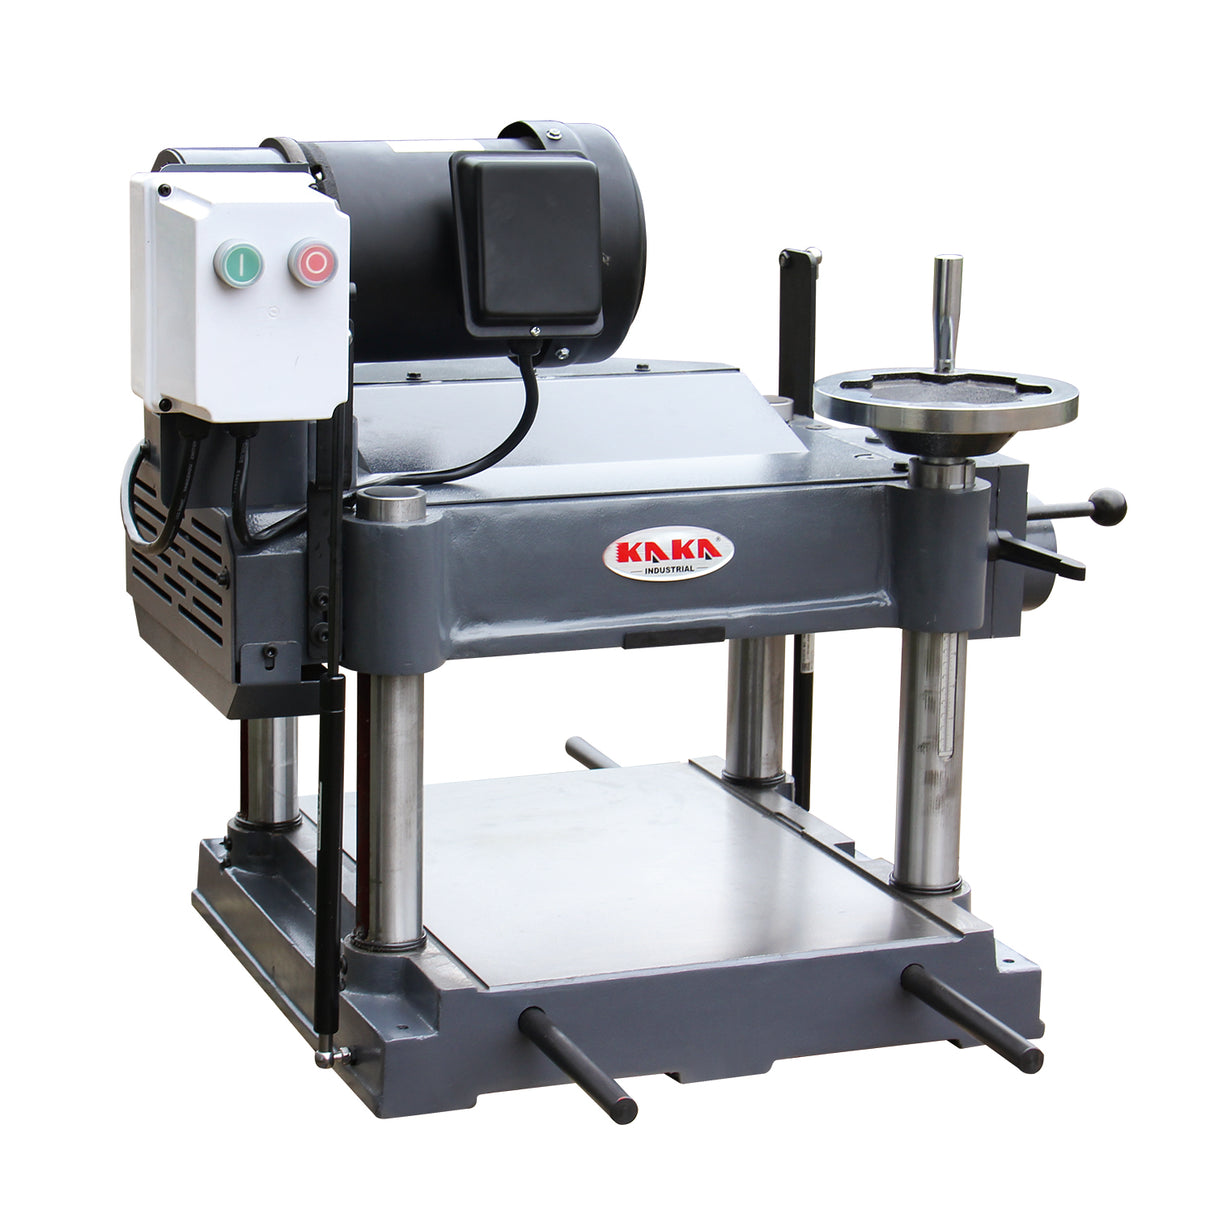 Kang Industrial WDP-4215B, Bench Top 380mm Thicknesser with Helical Spiral Cutterhead, 240V Motor